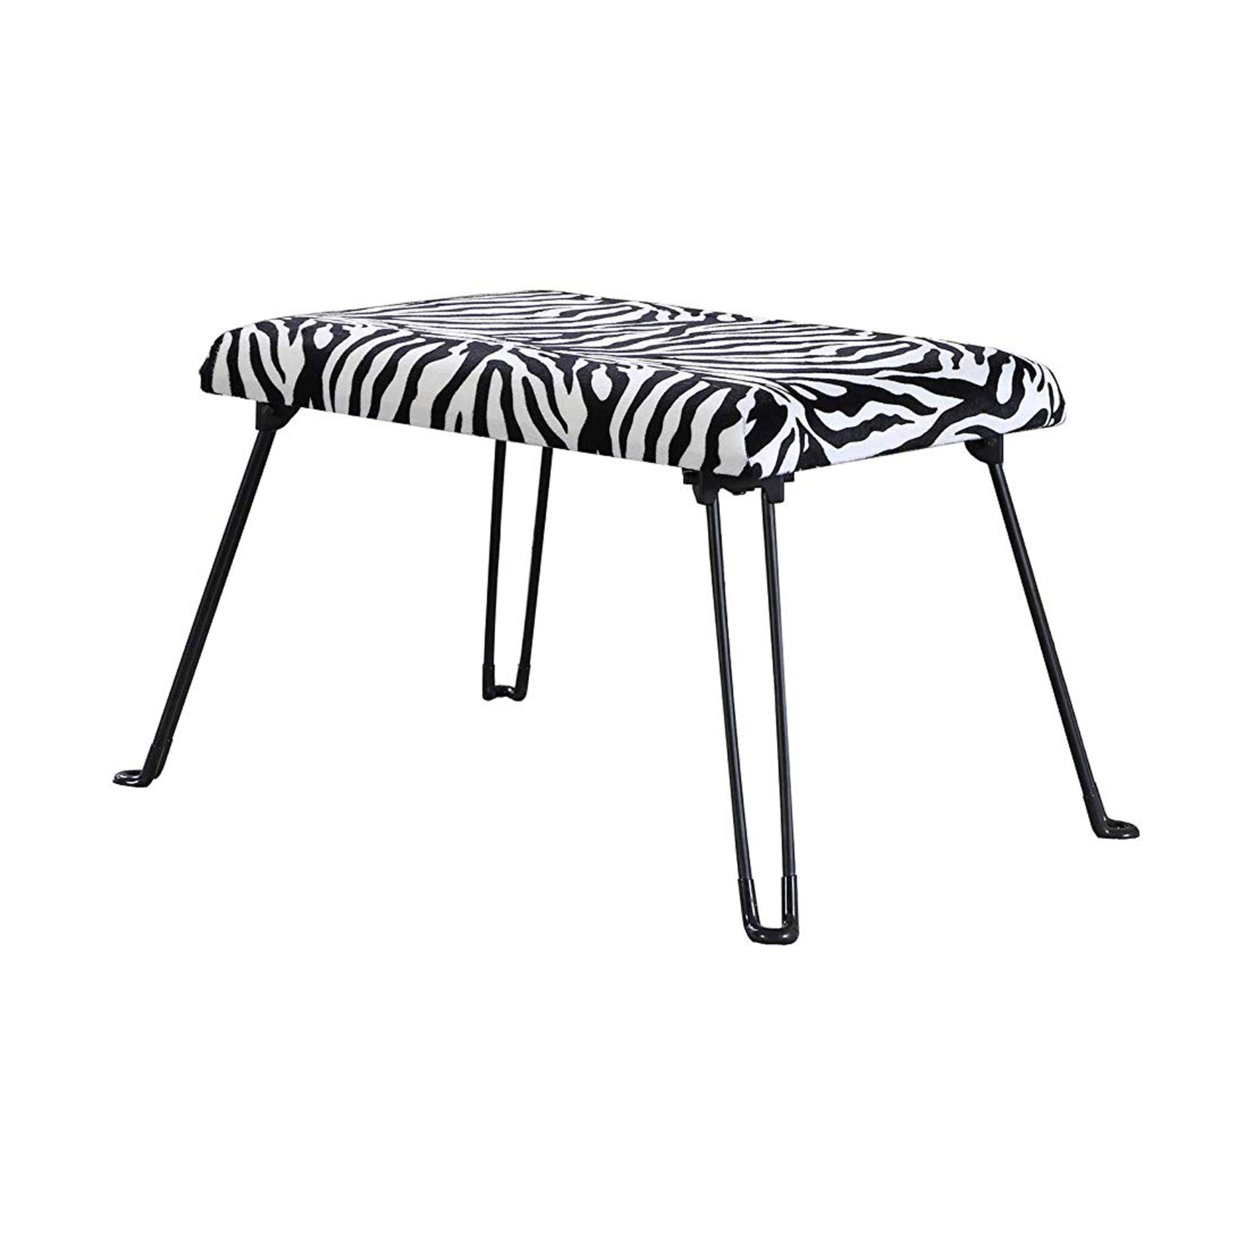 Accent Chair With Metal Foldable Legs And Animal Print, Black And White- Saltoro Sherpi